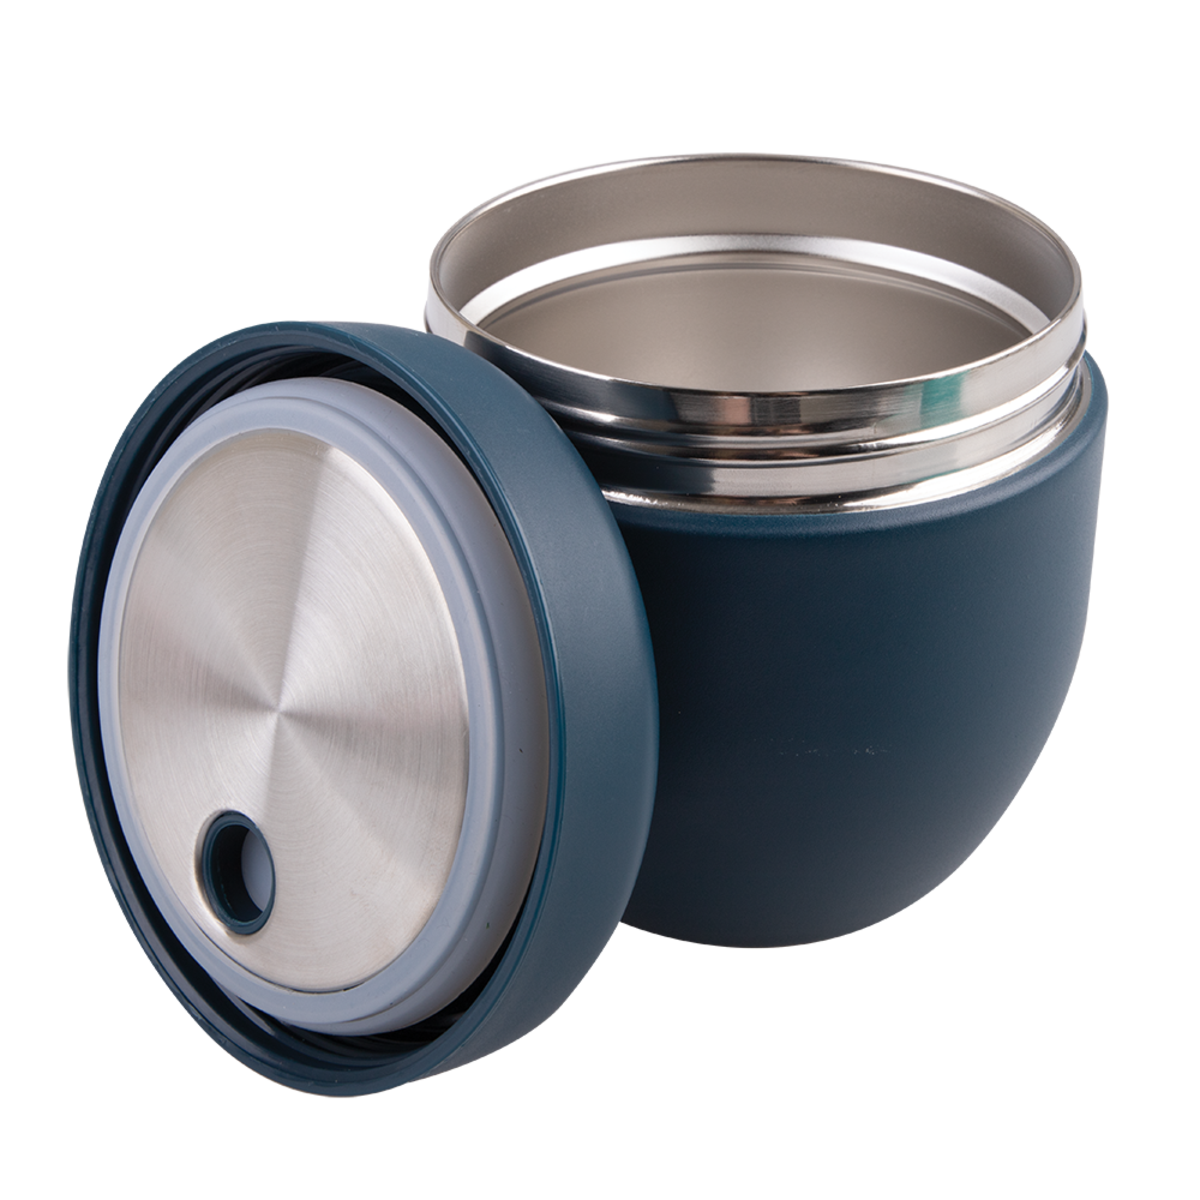 OASIS STAINLESS STEEL DOUBLE WALL INSULATED FOOD POD 470ML - NAVY